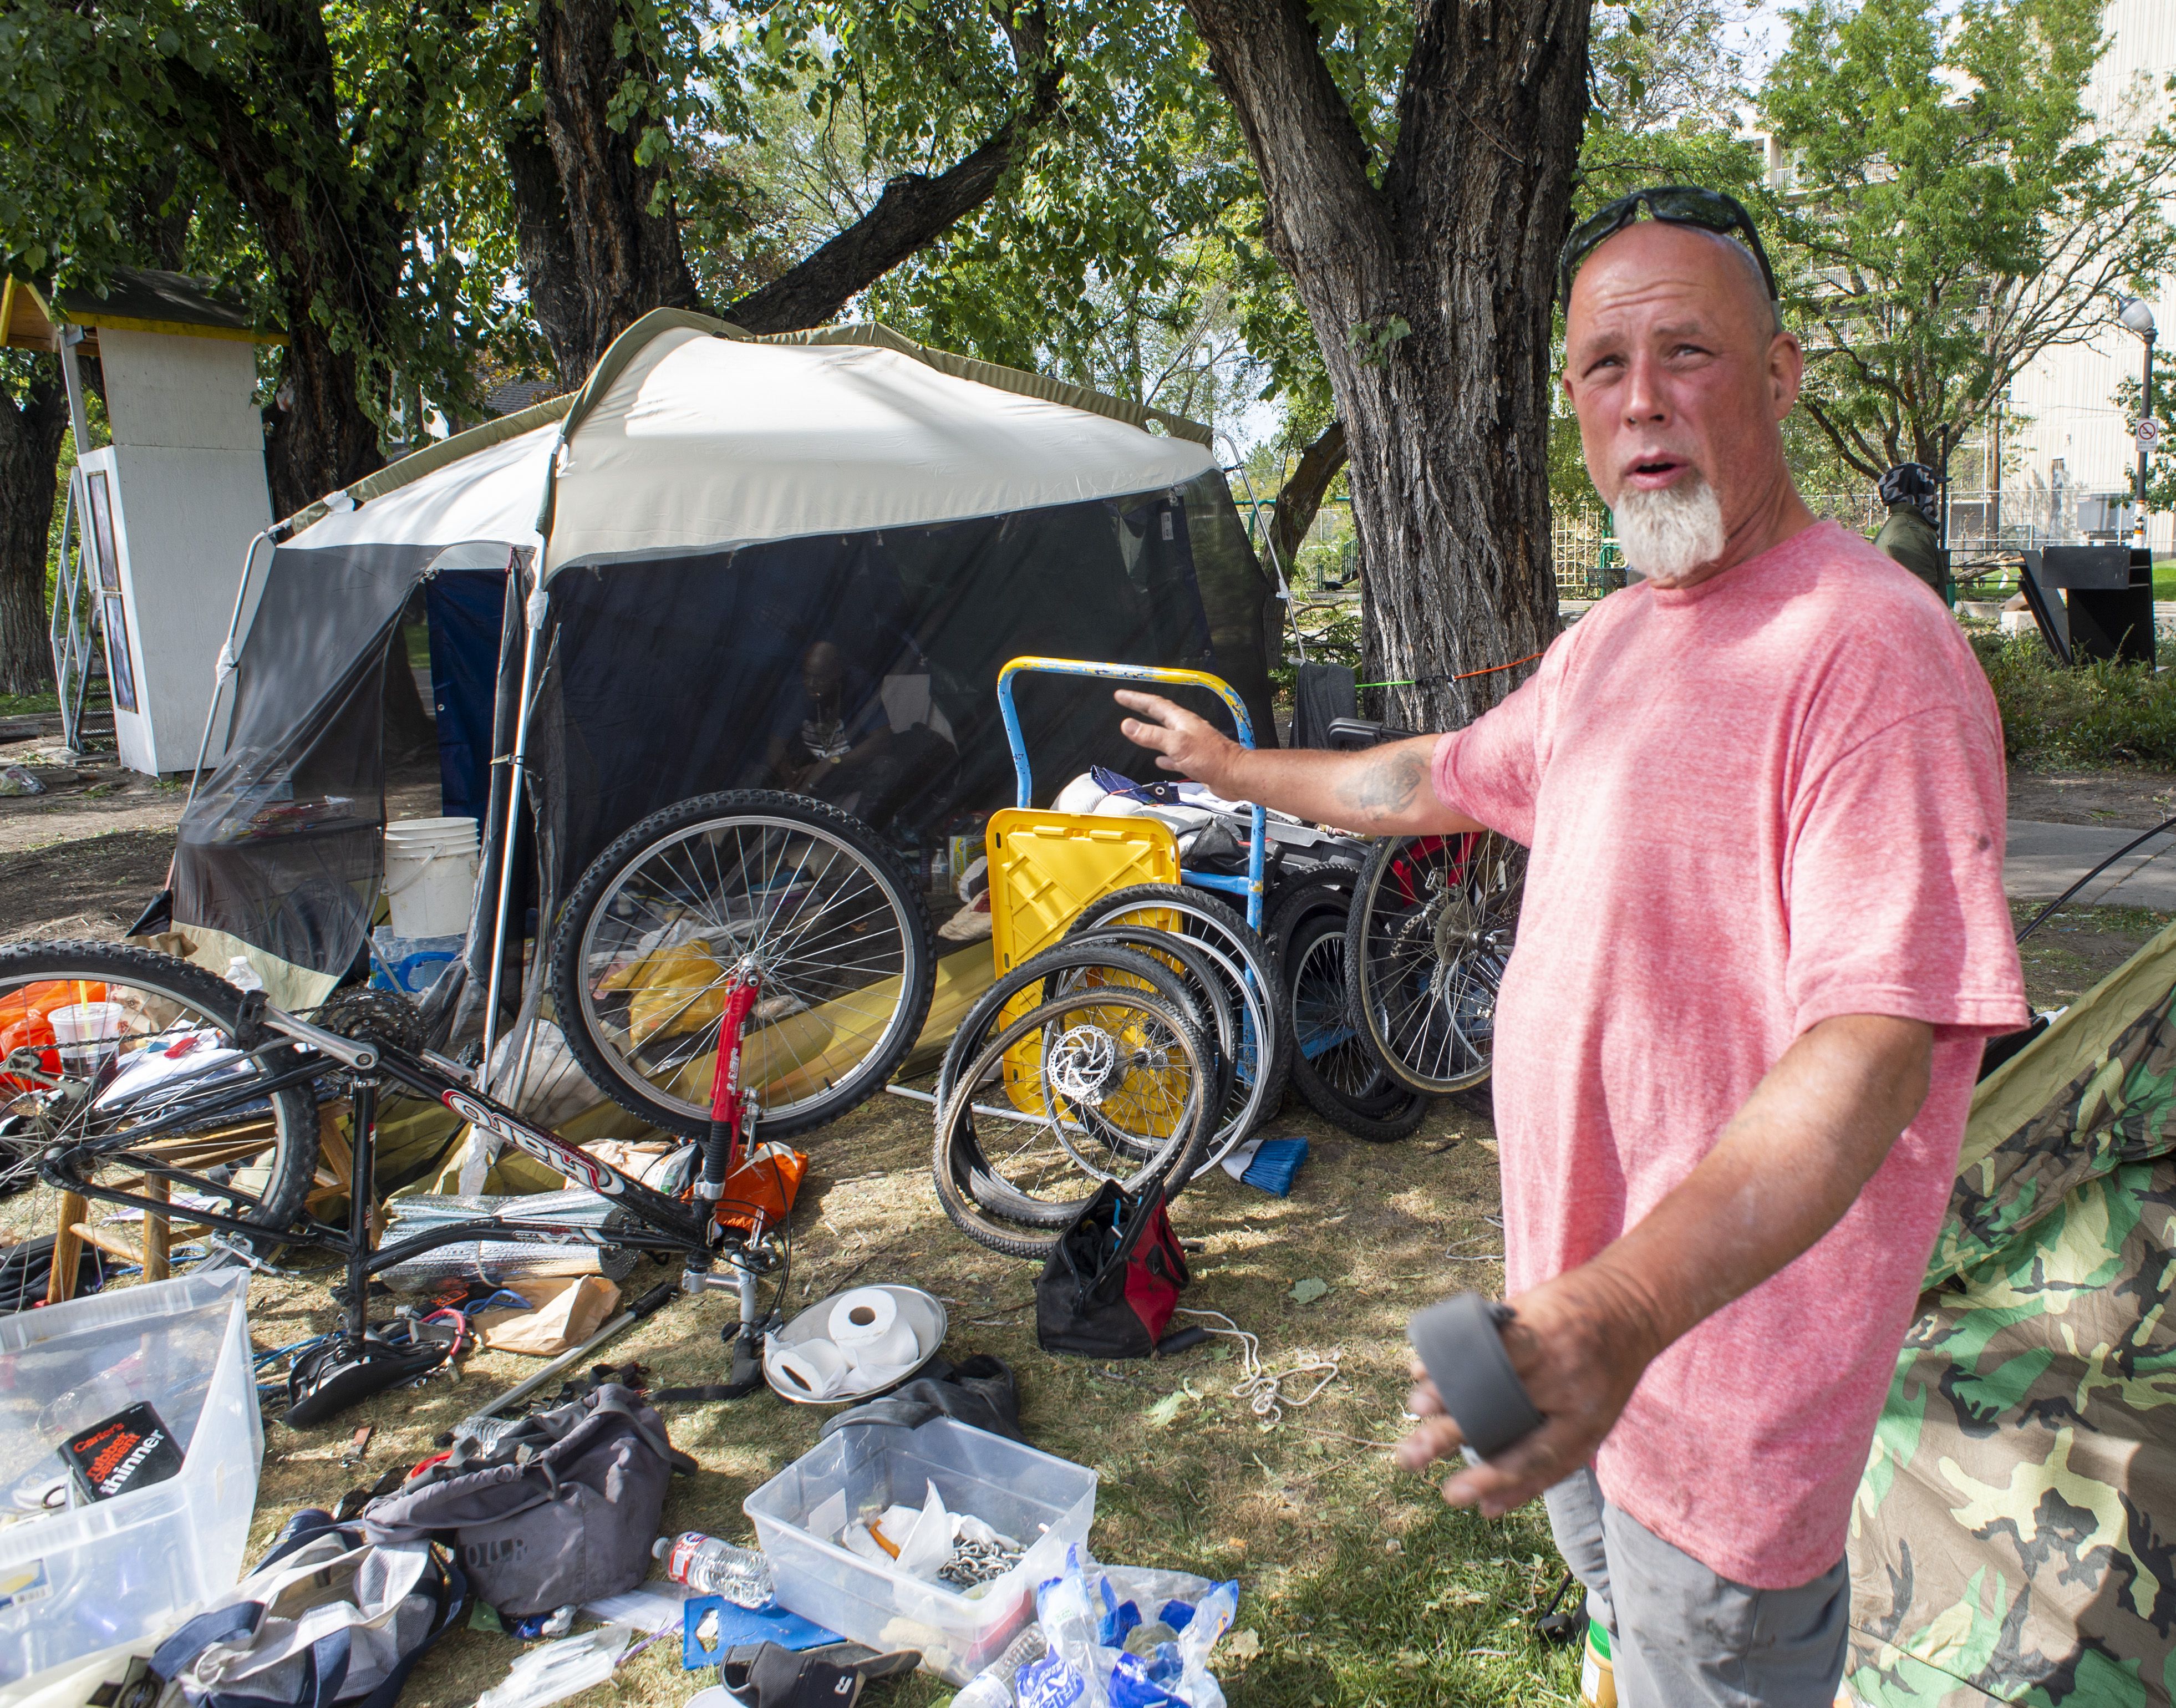 (Rick Egan  |  The Salt Lake Tribune) Richard Ryan discusses his options as he is notified on Wednesday, Sept. 10, 2020, that he will be forced to move his camp from Taufer Park in Salt Lake City first thing in the morning, fearing everything will be taken from him if he is not prepared when they arrive.